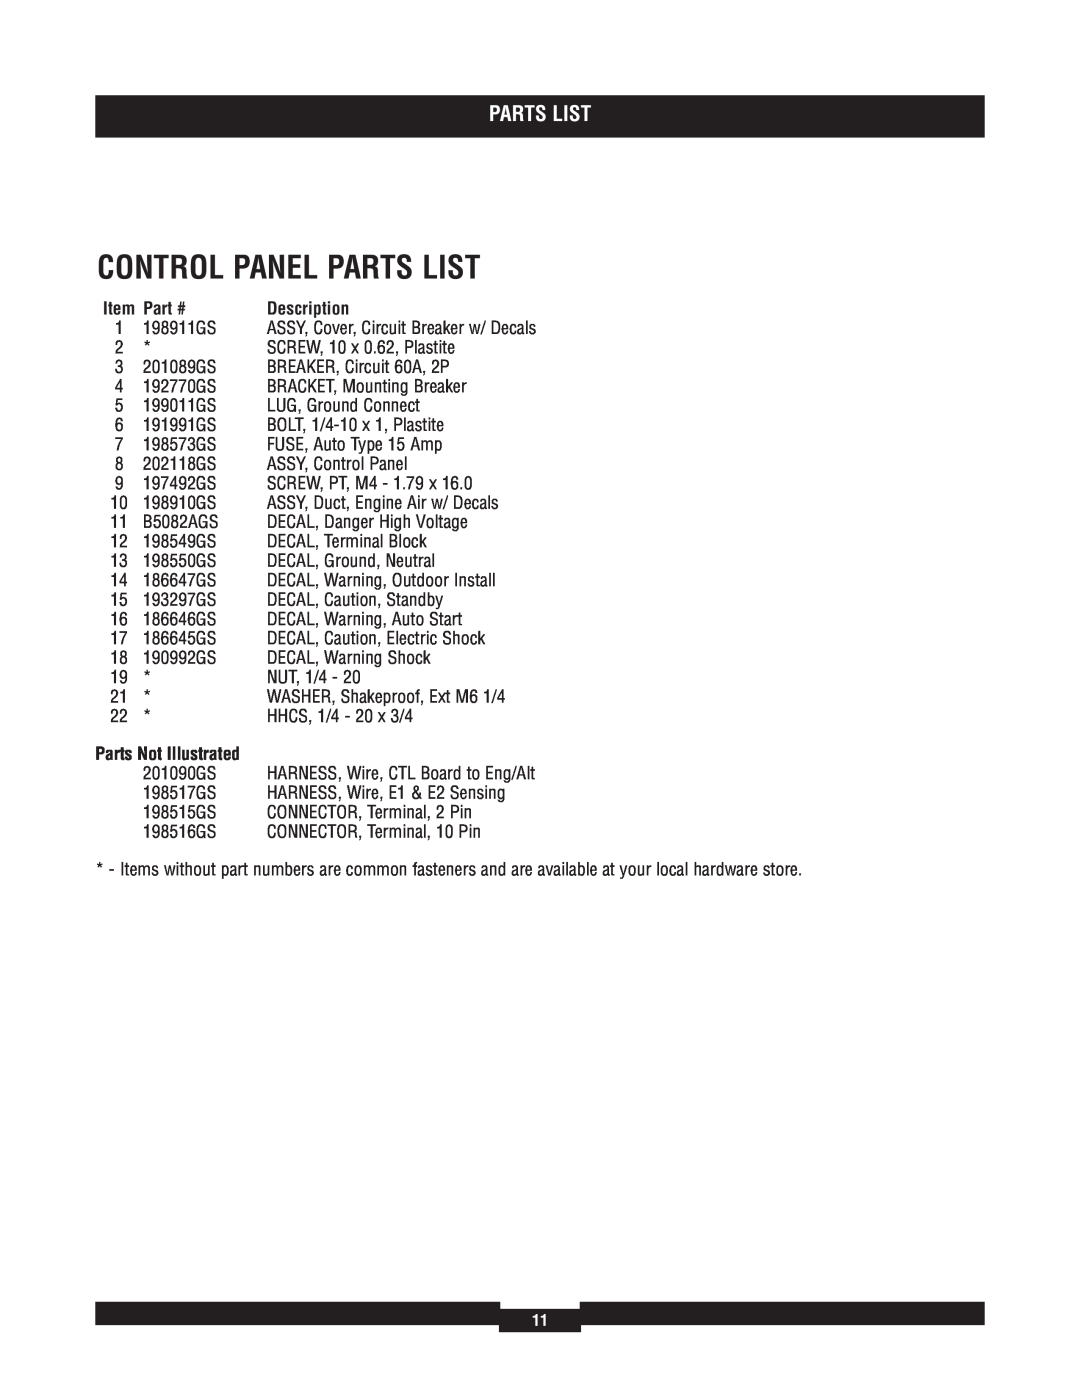 Briggs & Stratton 40273 manual Control Panel Parts List, Parts Not Illustrated 